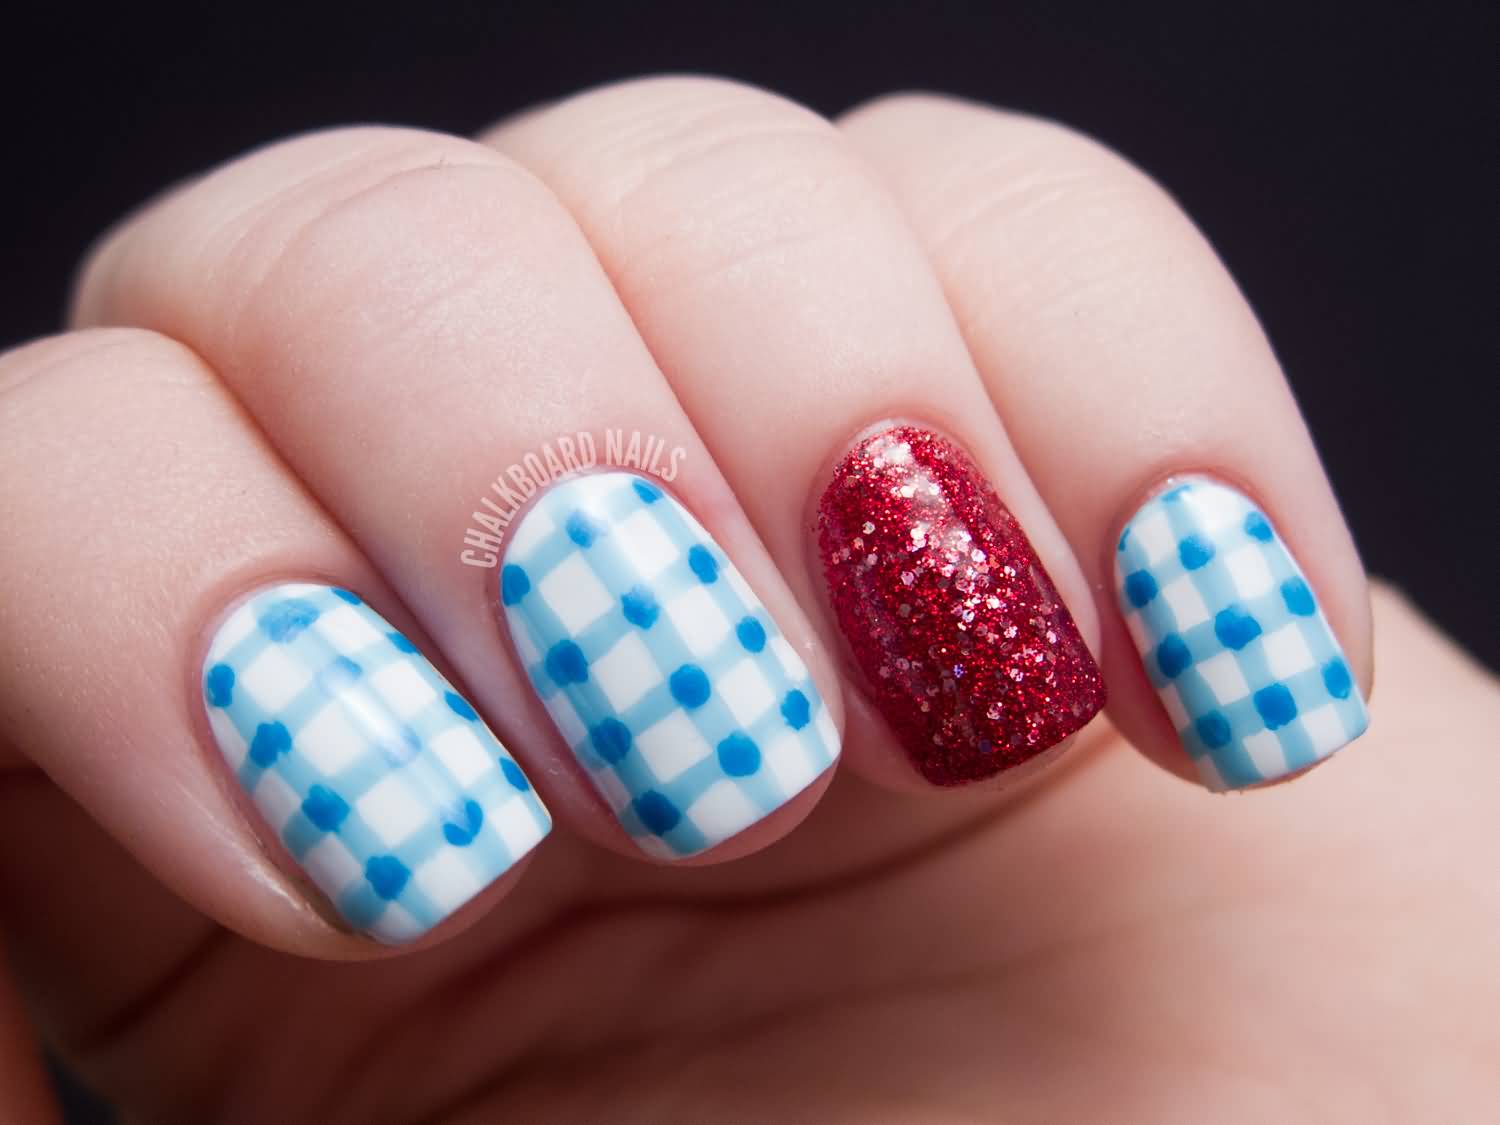 Blue Gingham Nail Art With Accent Red Glitter Design